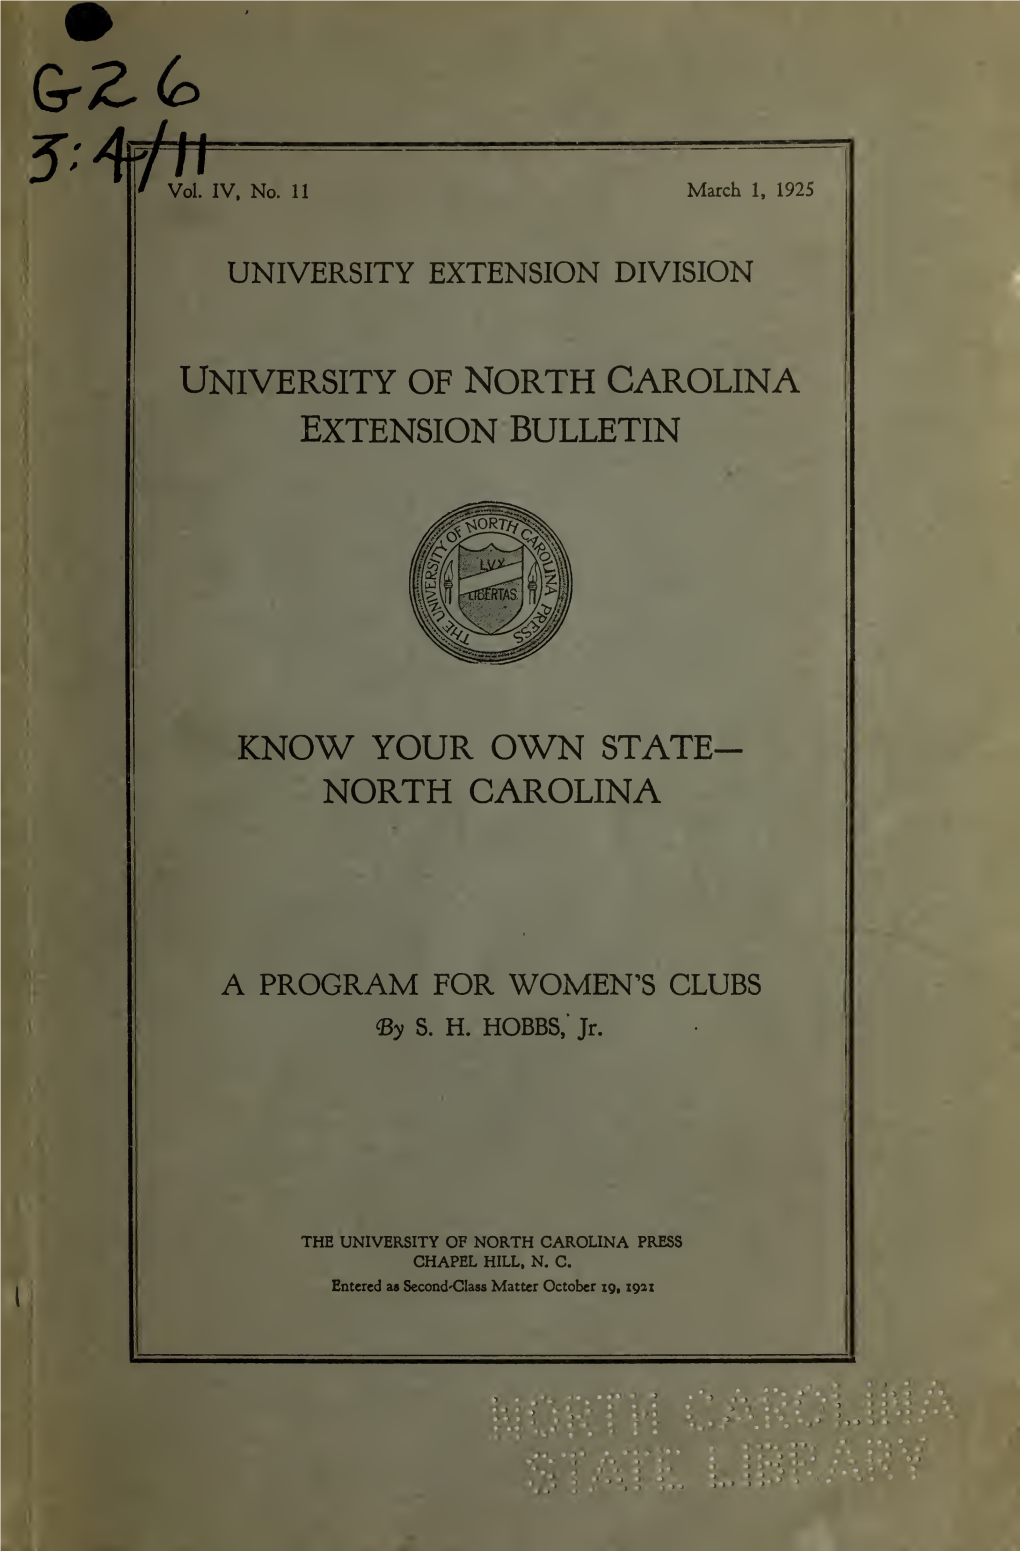 Know Your Own State- North Carolina